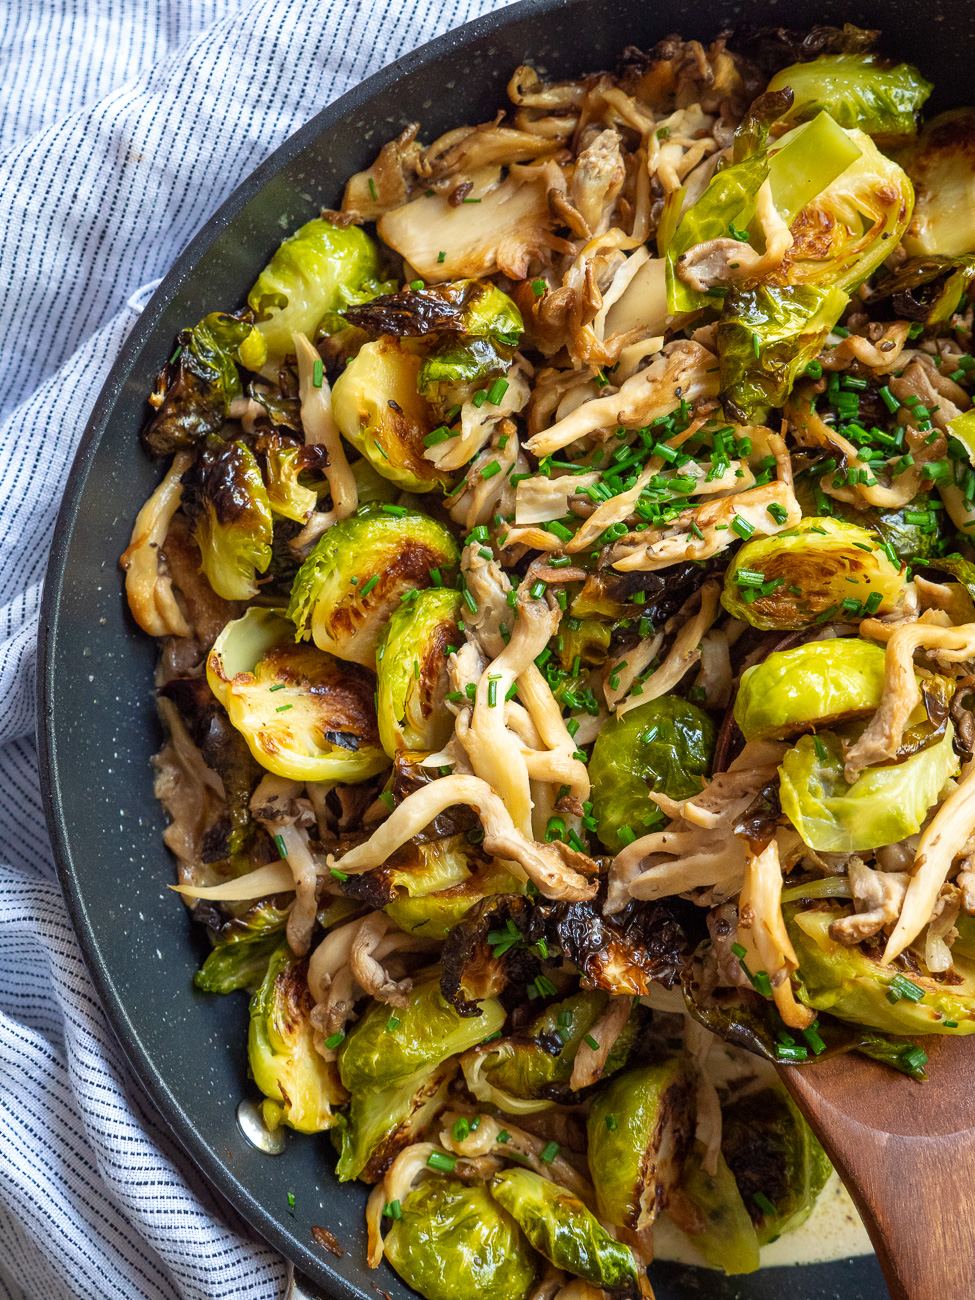 Mushroom and White Wine Brussels Sprouts